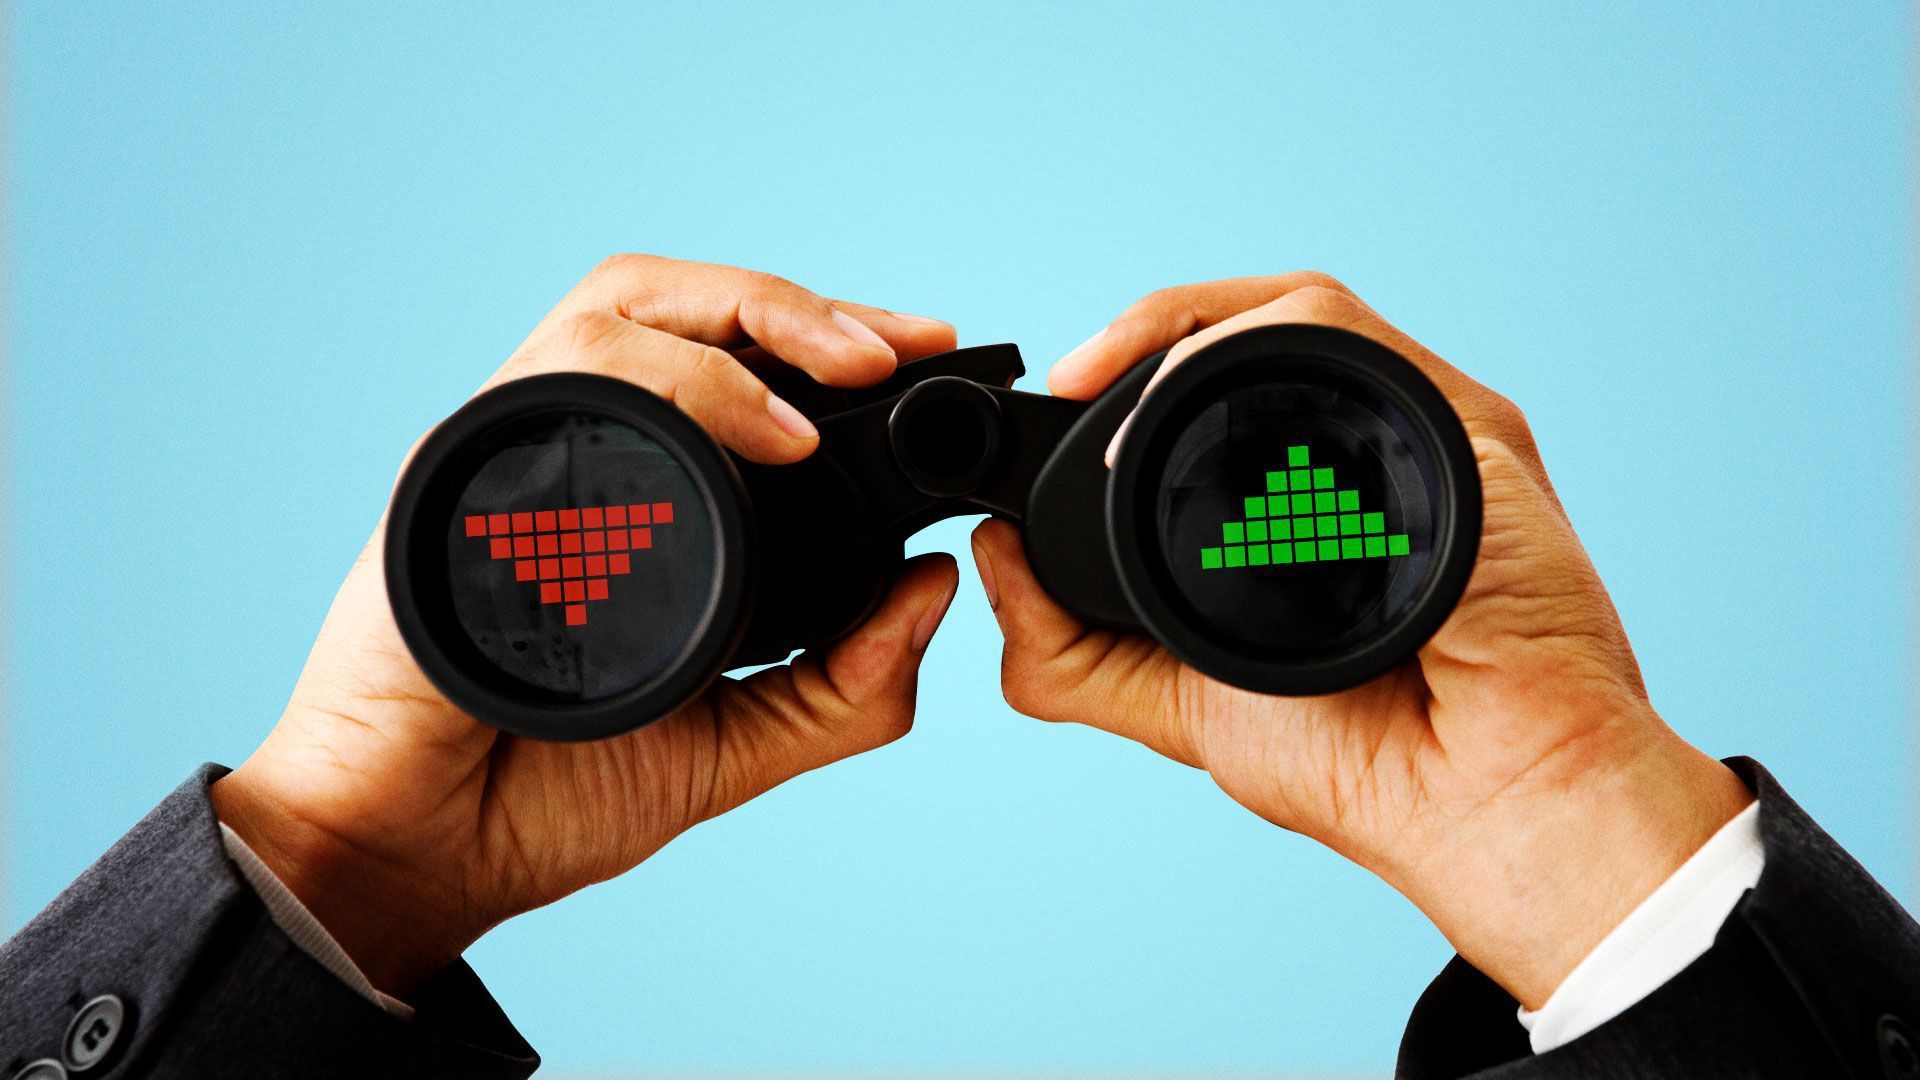 Illustration of a pair of binoculars with a green arrow up in one lens and a red arrow down in the other.